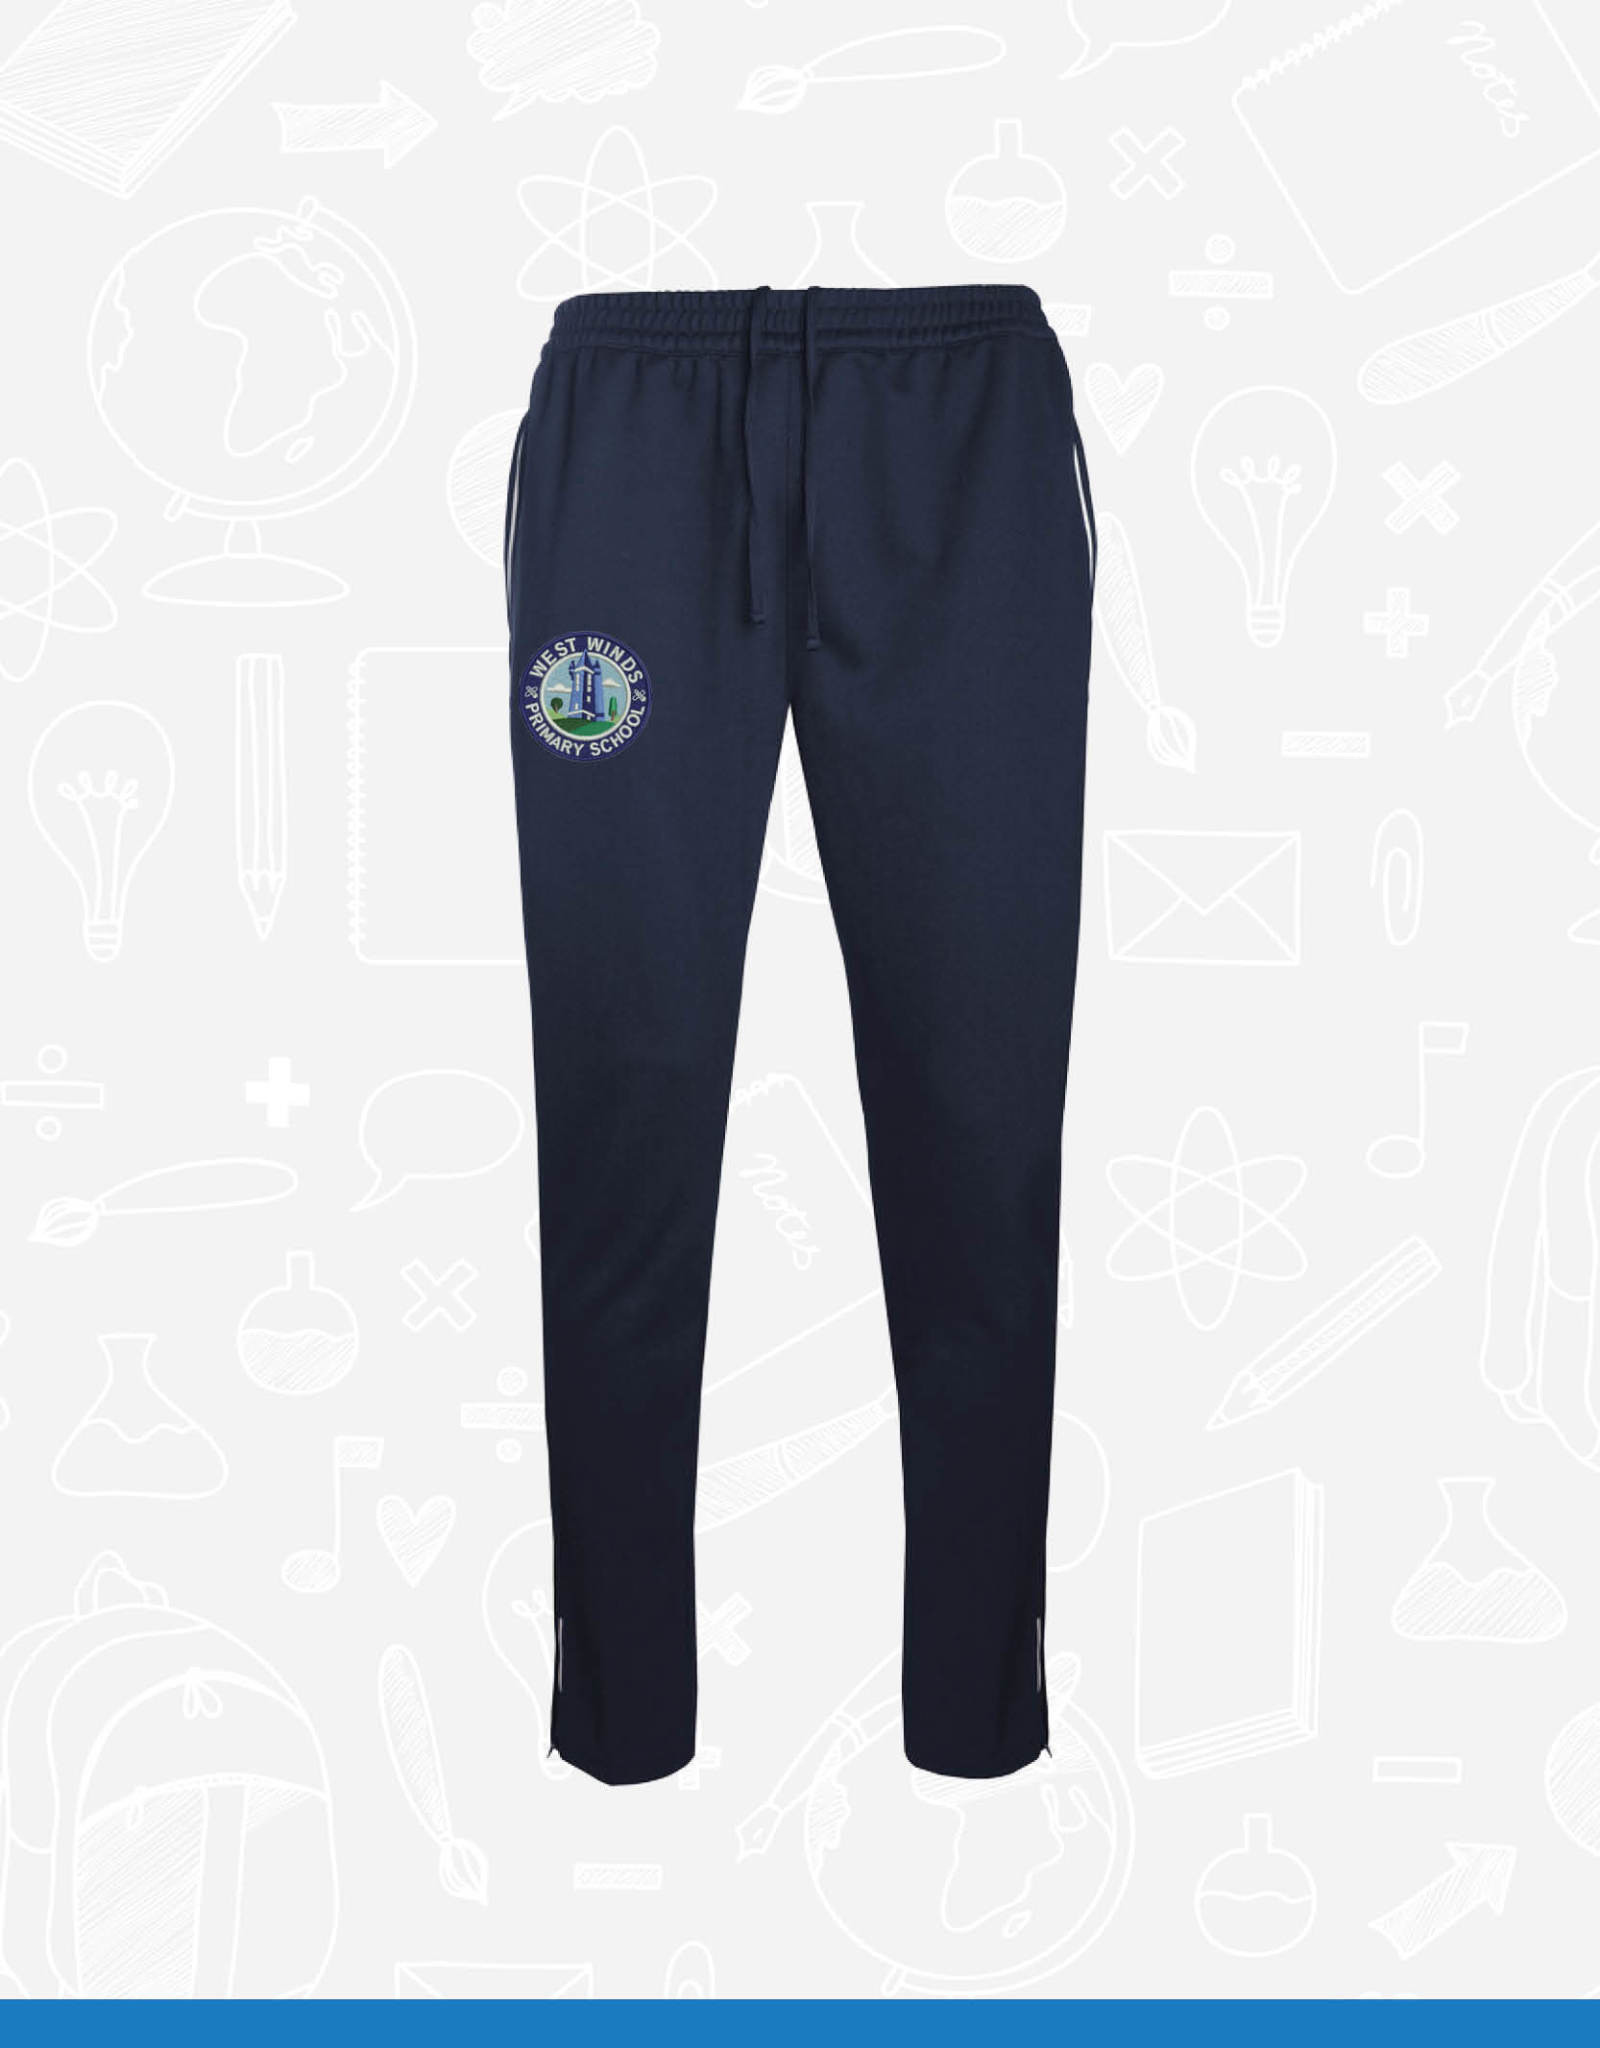 Banner West Winds PS Training Pants (111885)